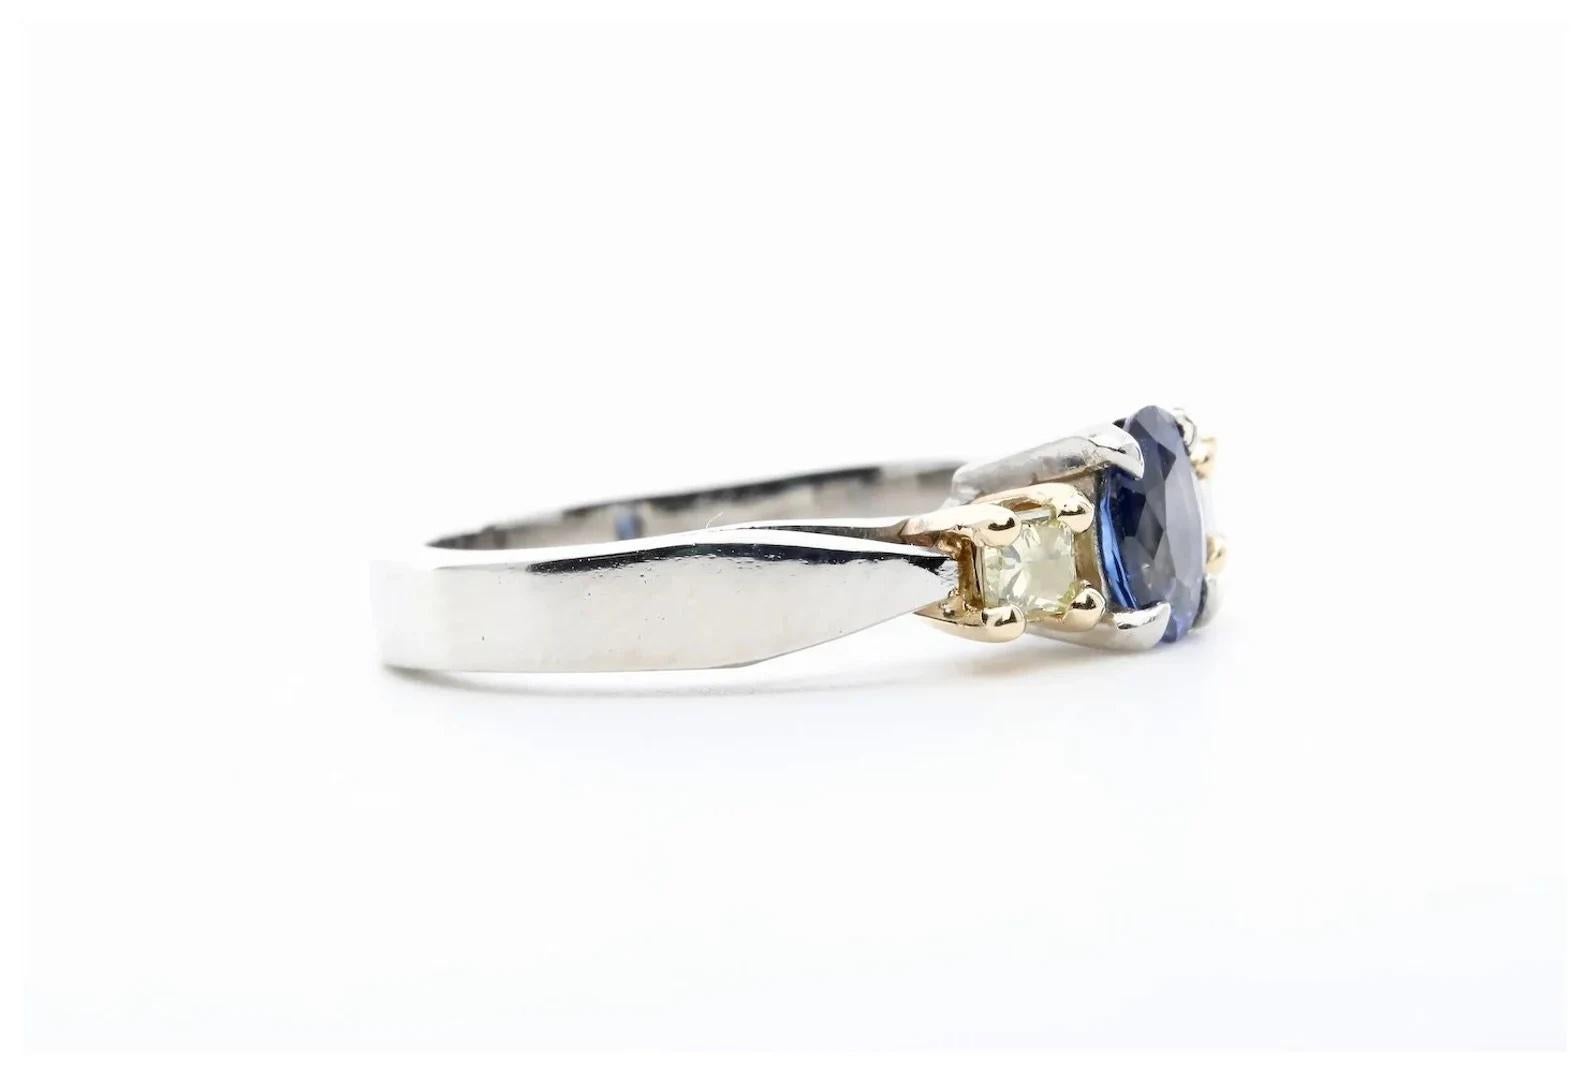 A three stone sapphire, and diamond ring in platinum and 18 karat yellow gold. Centering this ring is a 0.70 carat natural, no heat oval sapphire of beautiful vivid blue color. Framing the sapphire are a pair of 0.30ctw princess cut fancy yellow